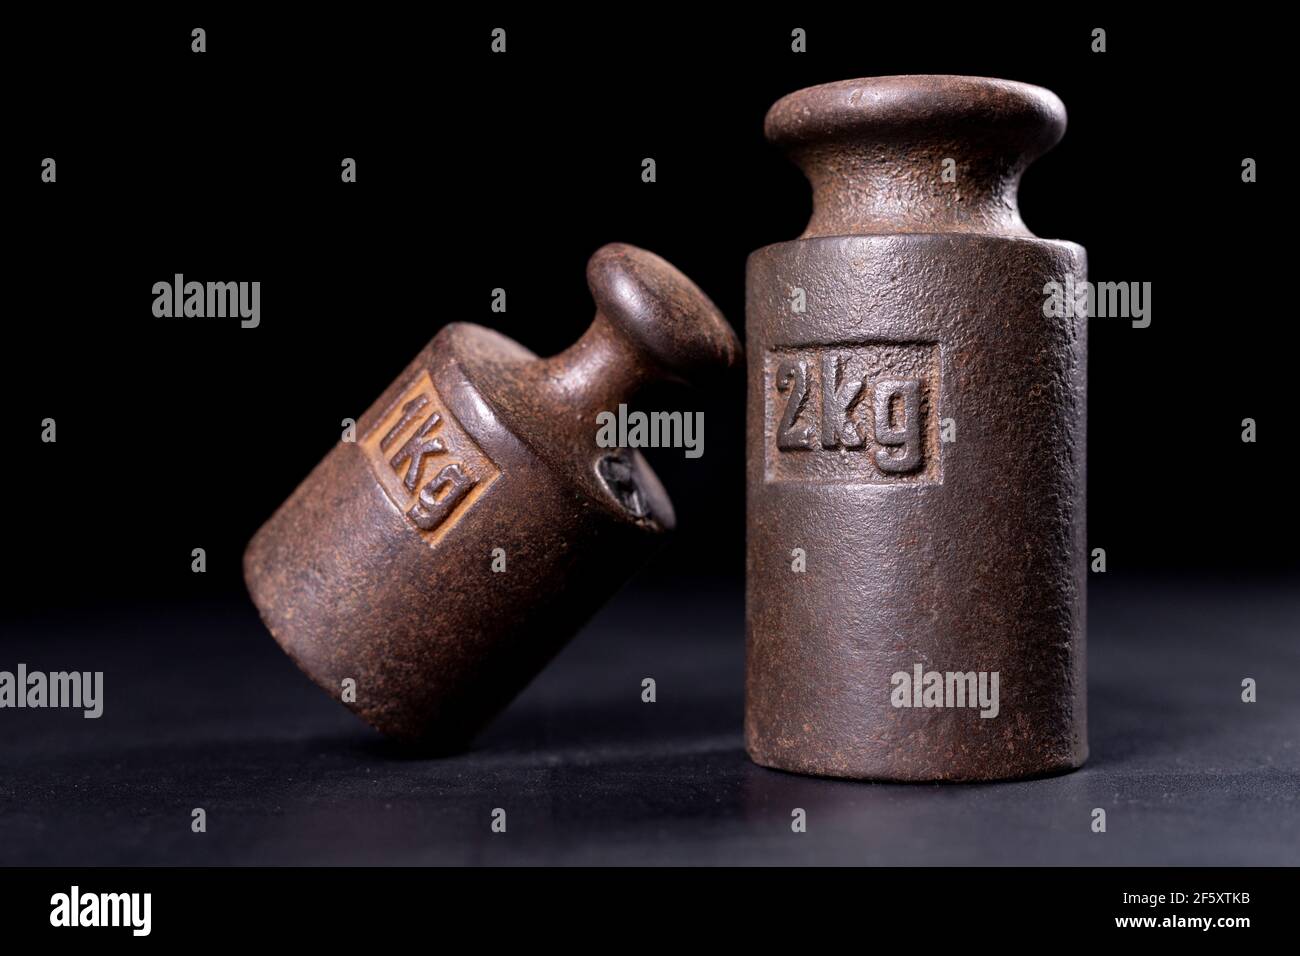 Metal weights for measuring weight. Standard for weighing goods. Dark background. Stock Photo